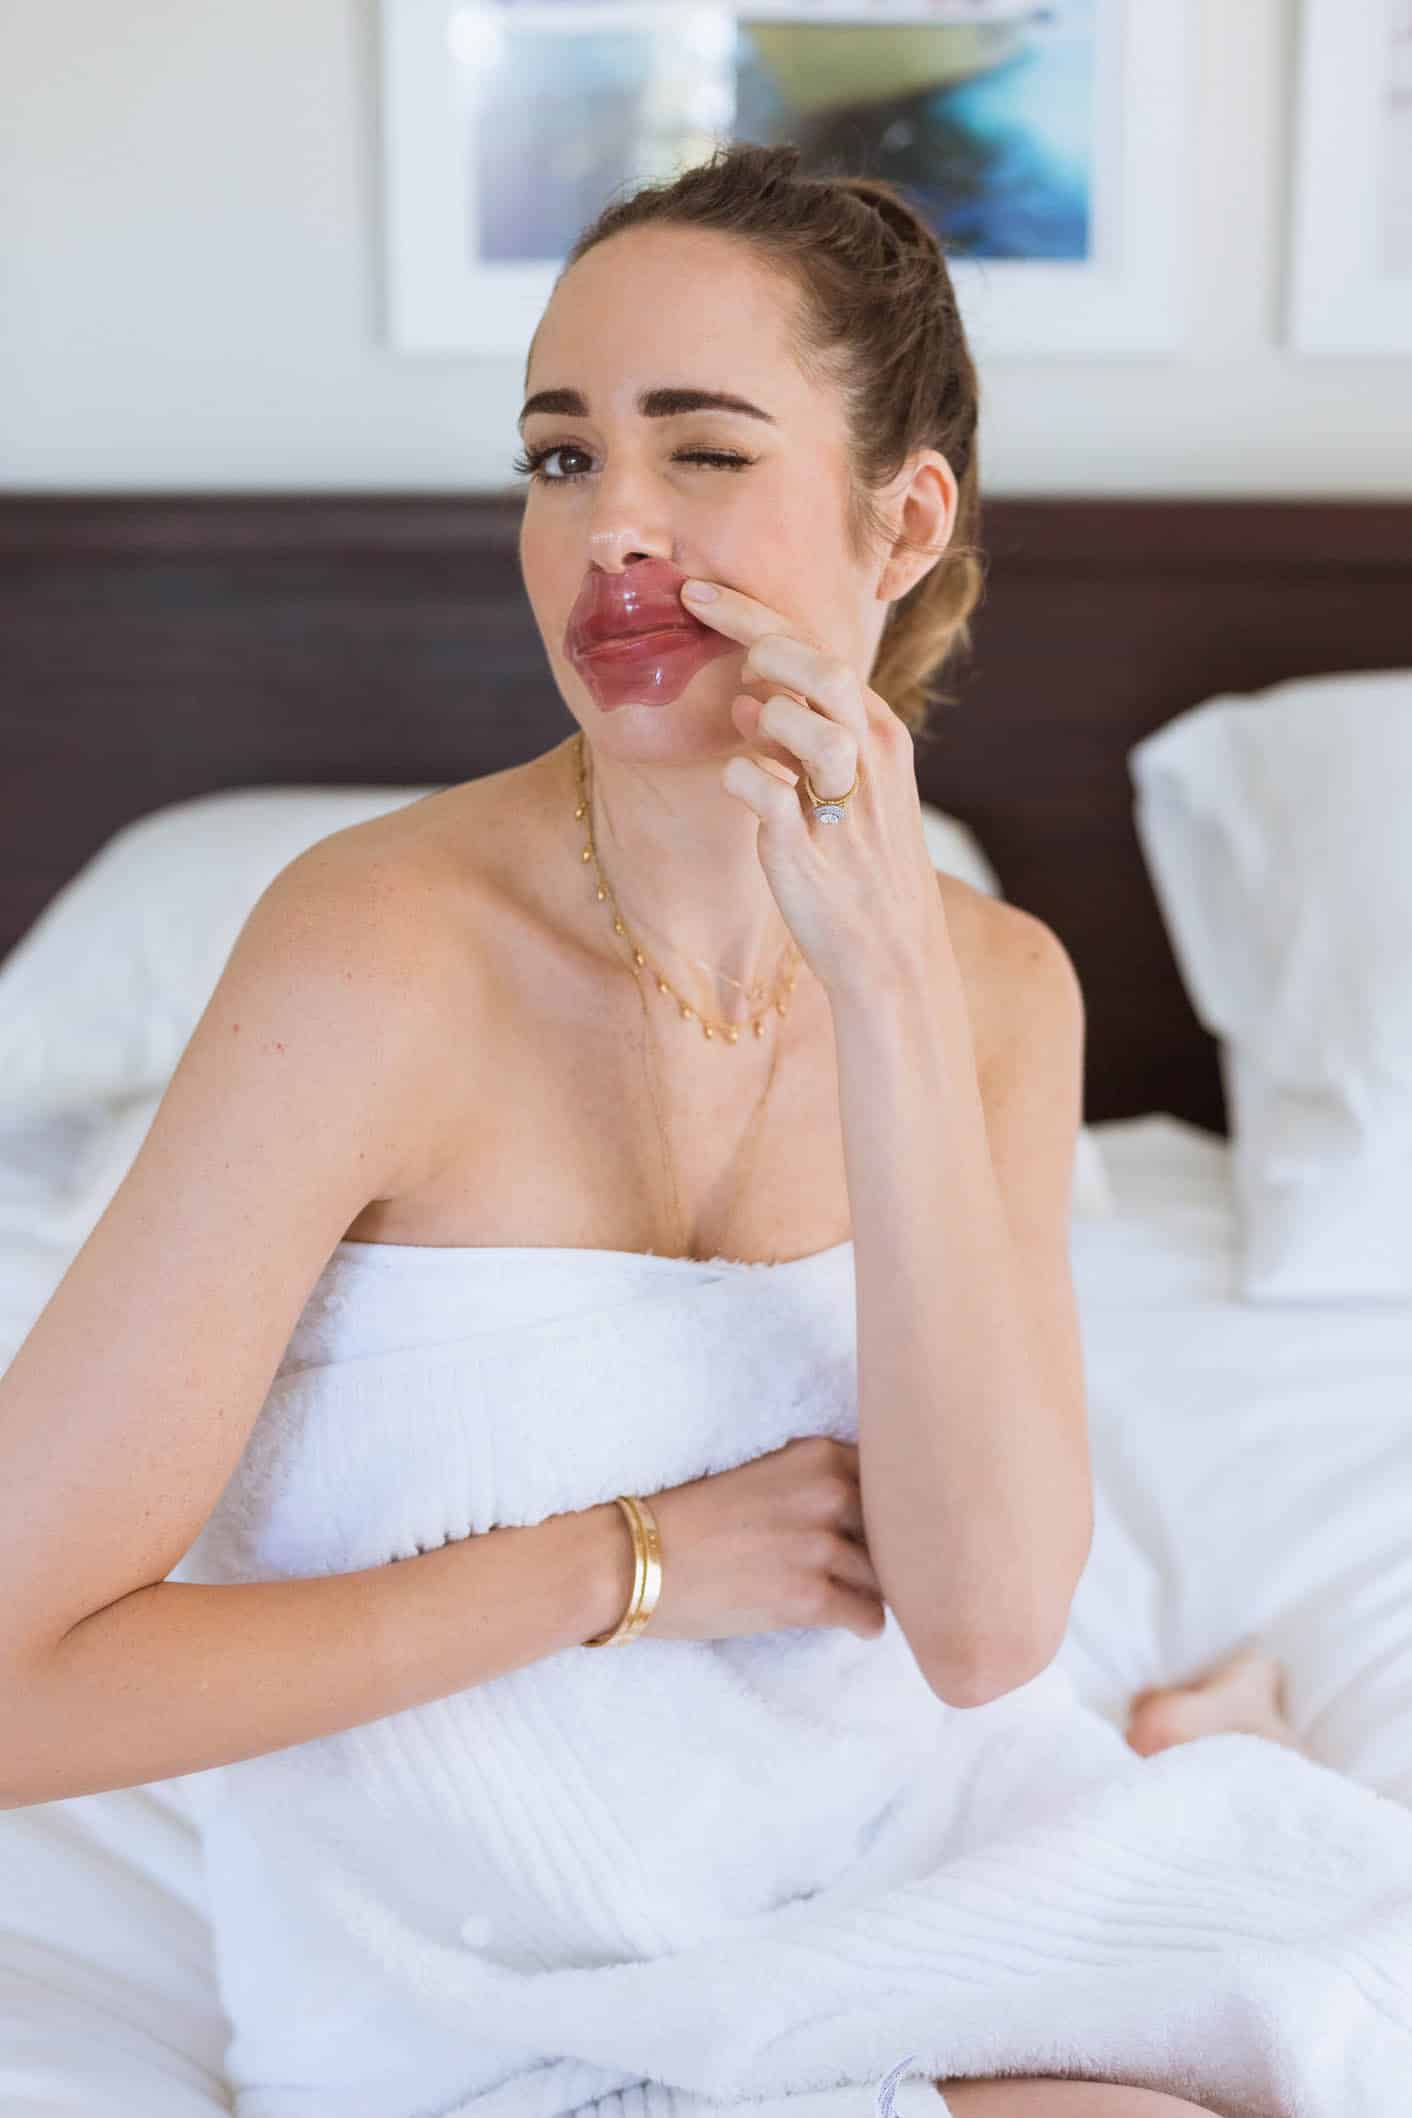 Louise Roe beauty tips and tricks on plumper looking lips